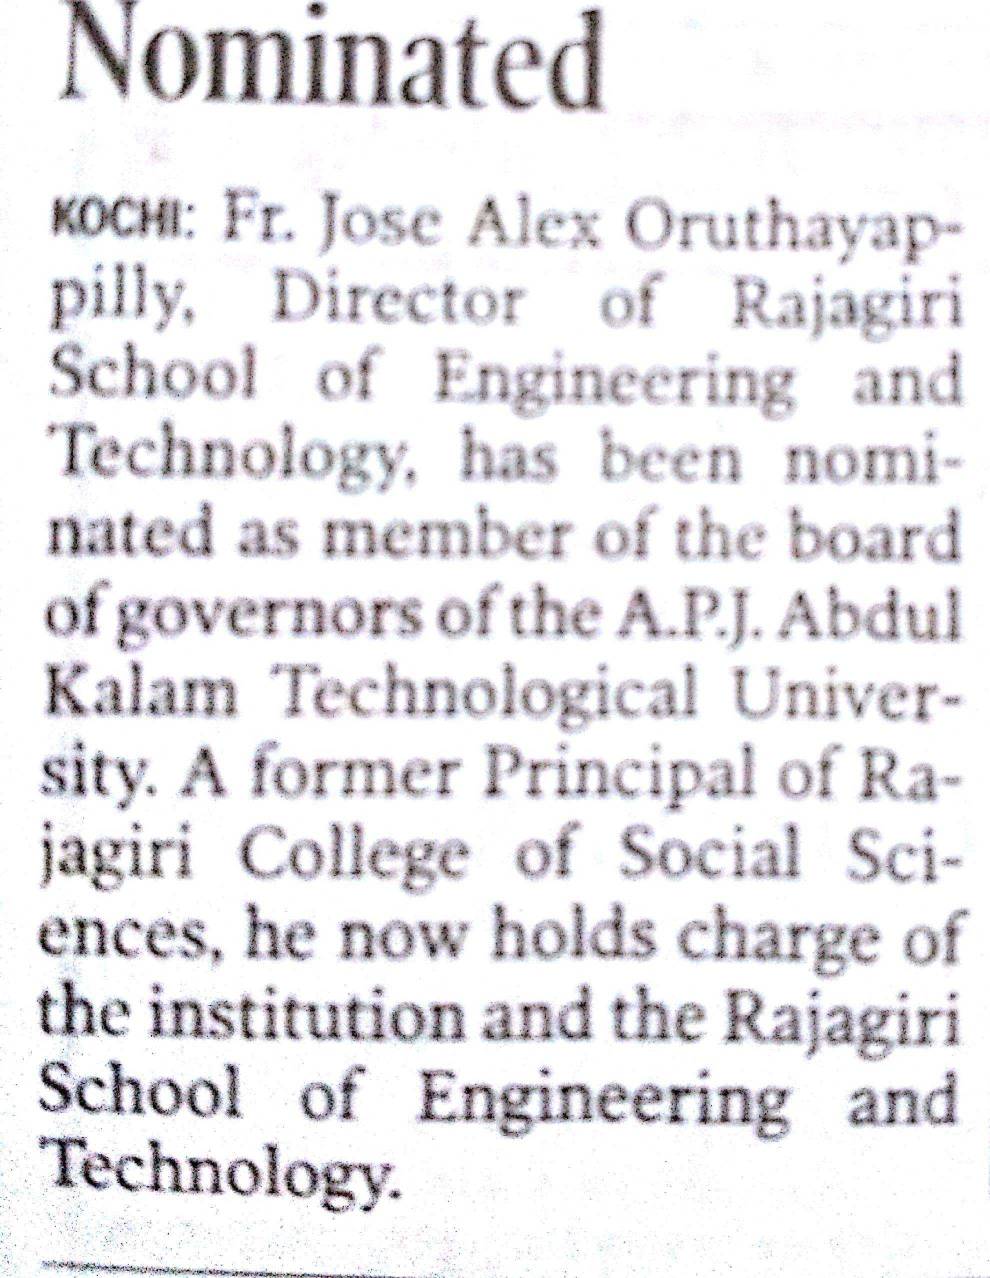 Board of Governors of APJ Abdul Kalam Technological University